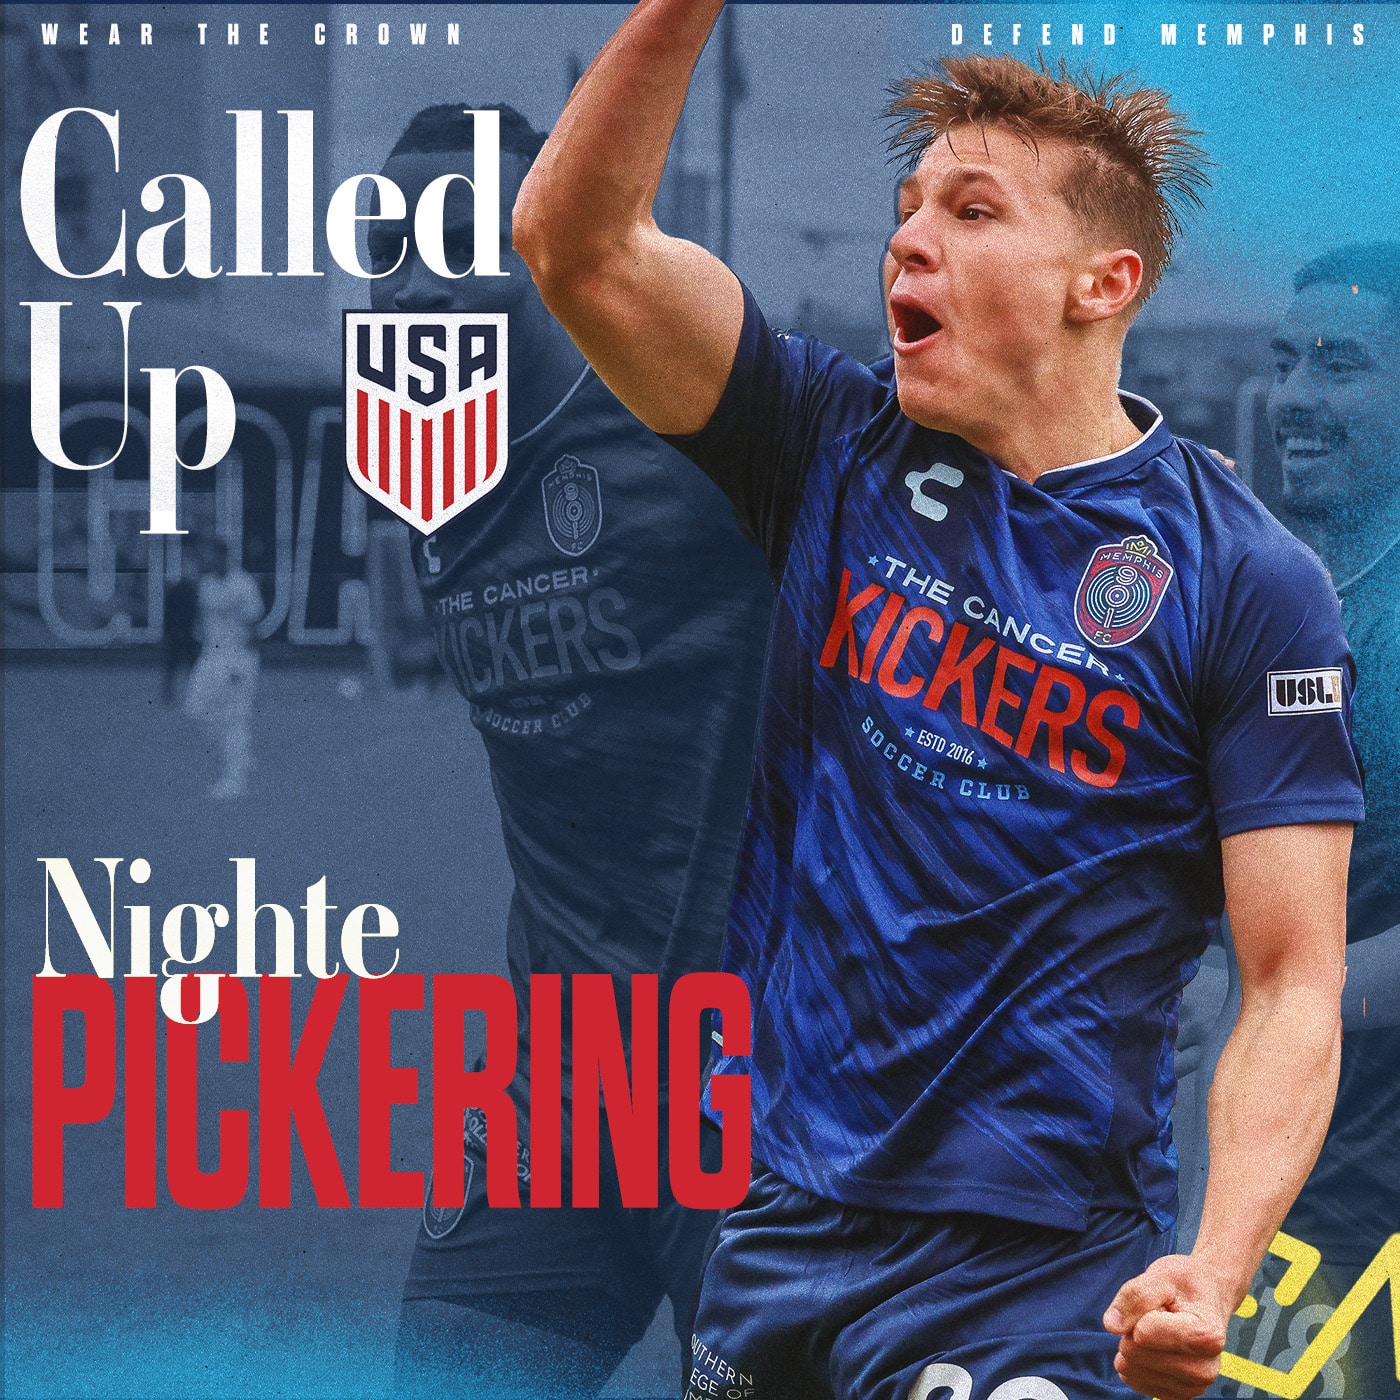 901 FC’s Nighte Pickering Called Up To US U19 National Team